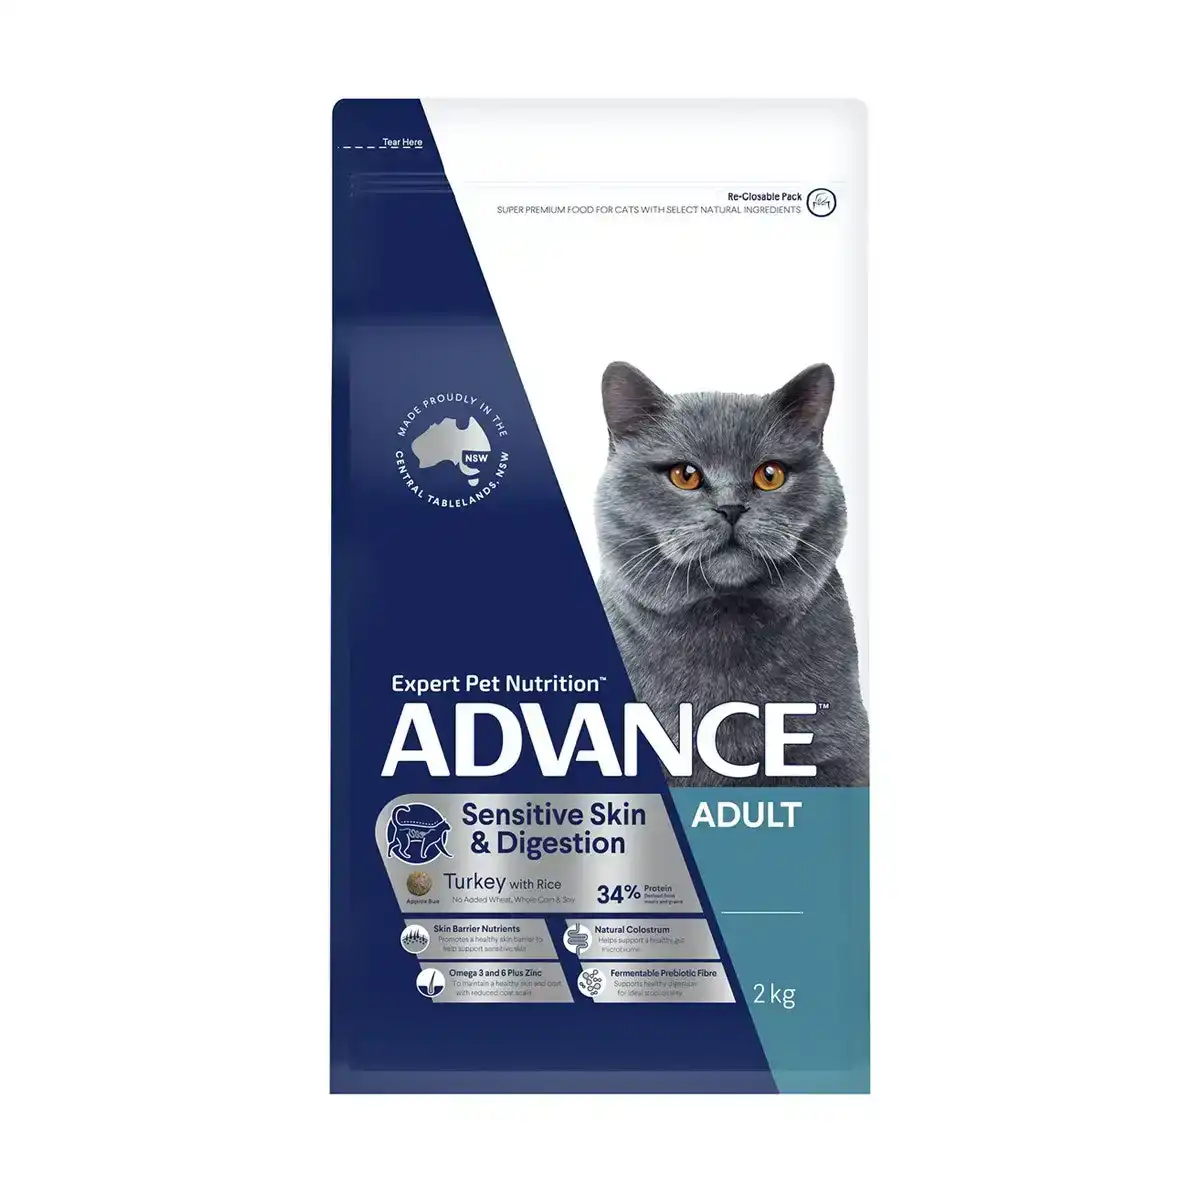 ADVANCE Sensitive Skin & Digestion Adult Cat Turkey with Rice Dry Cat Food 2 Kg